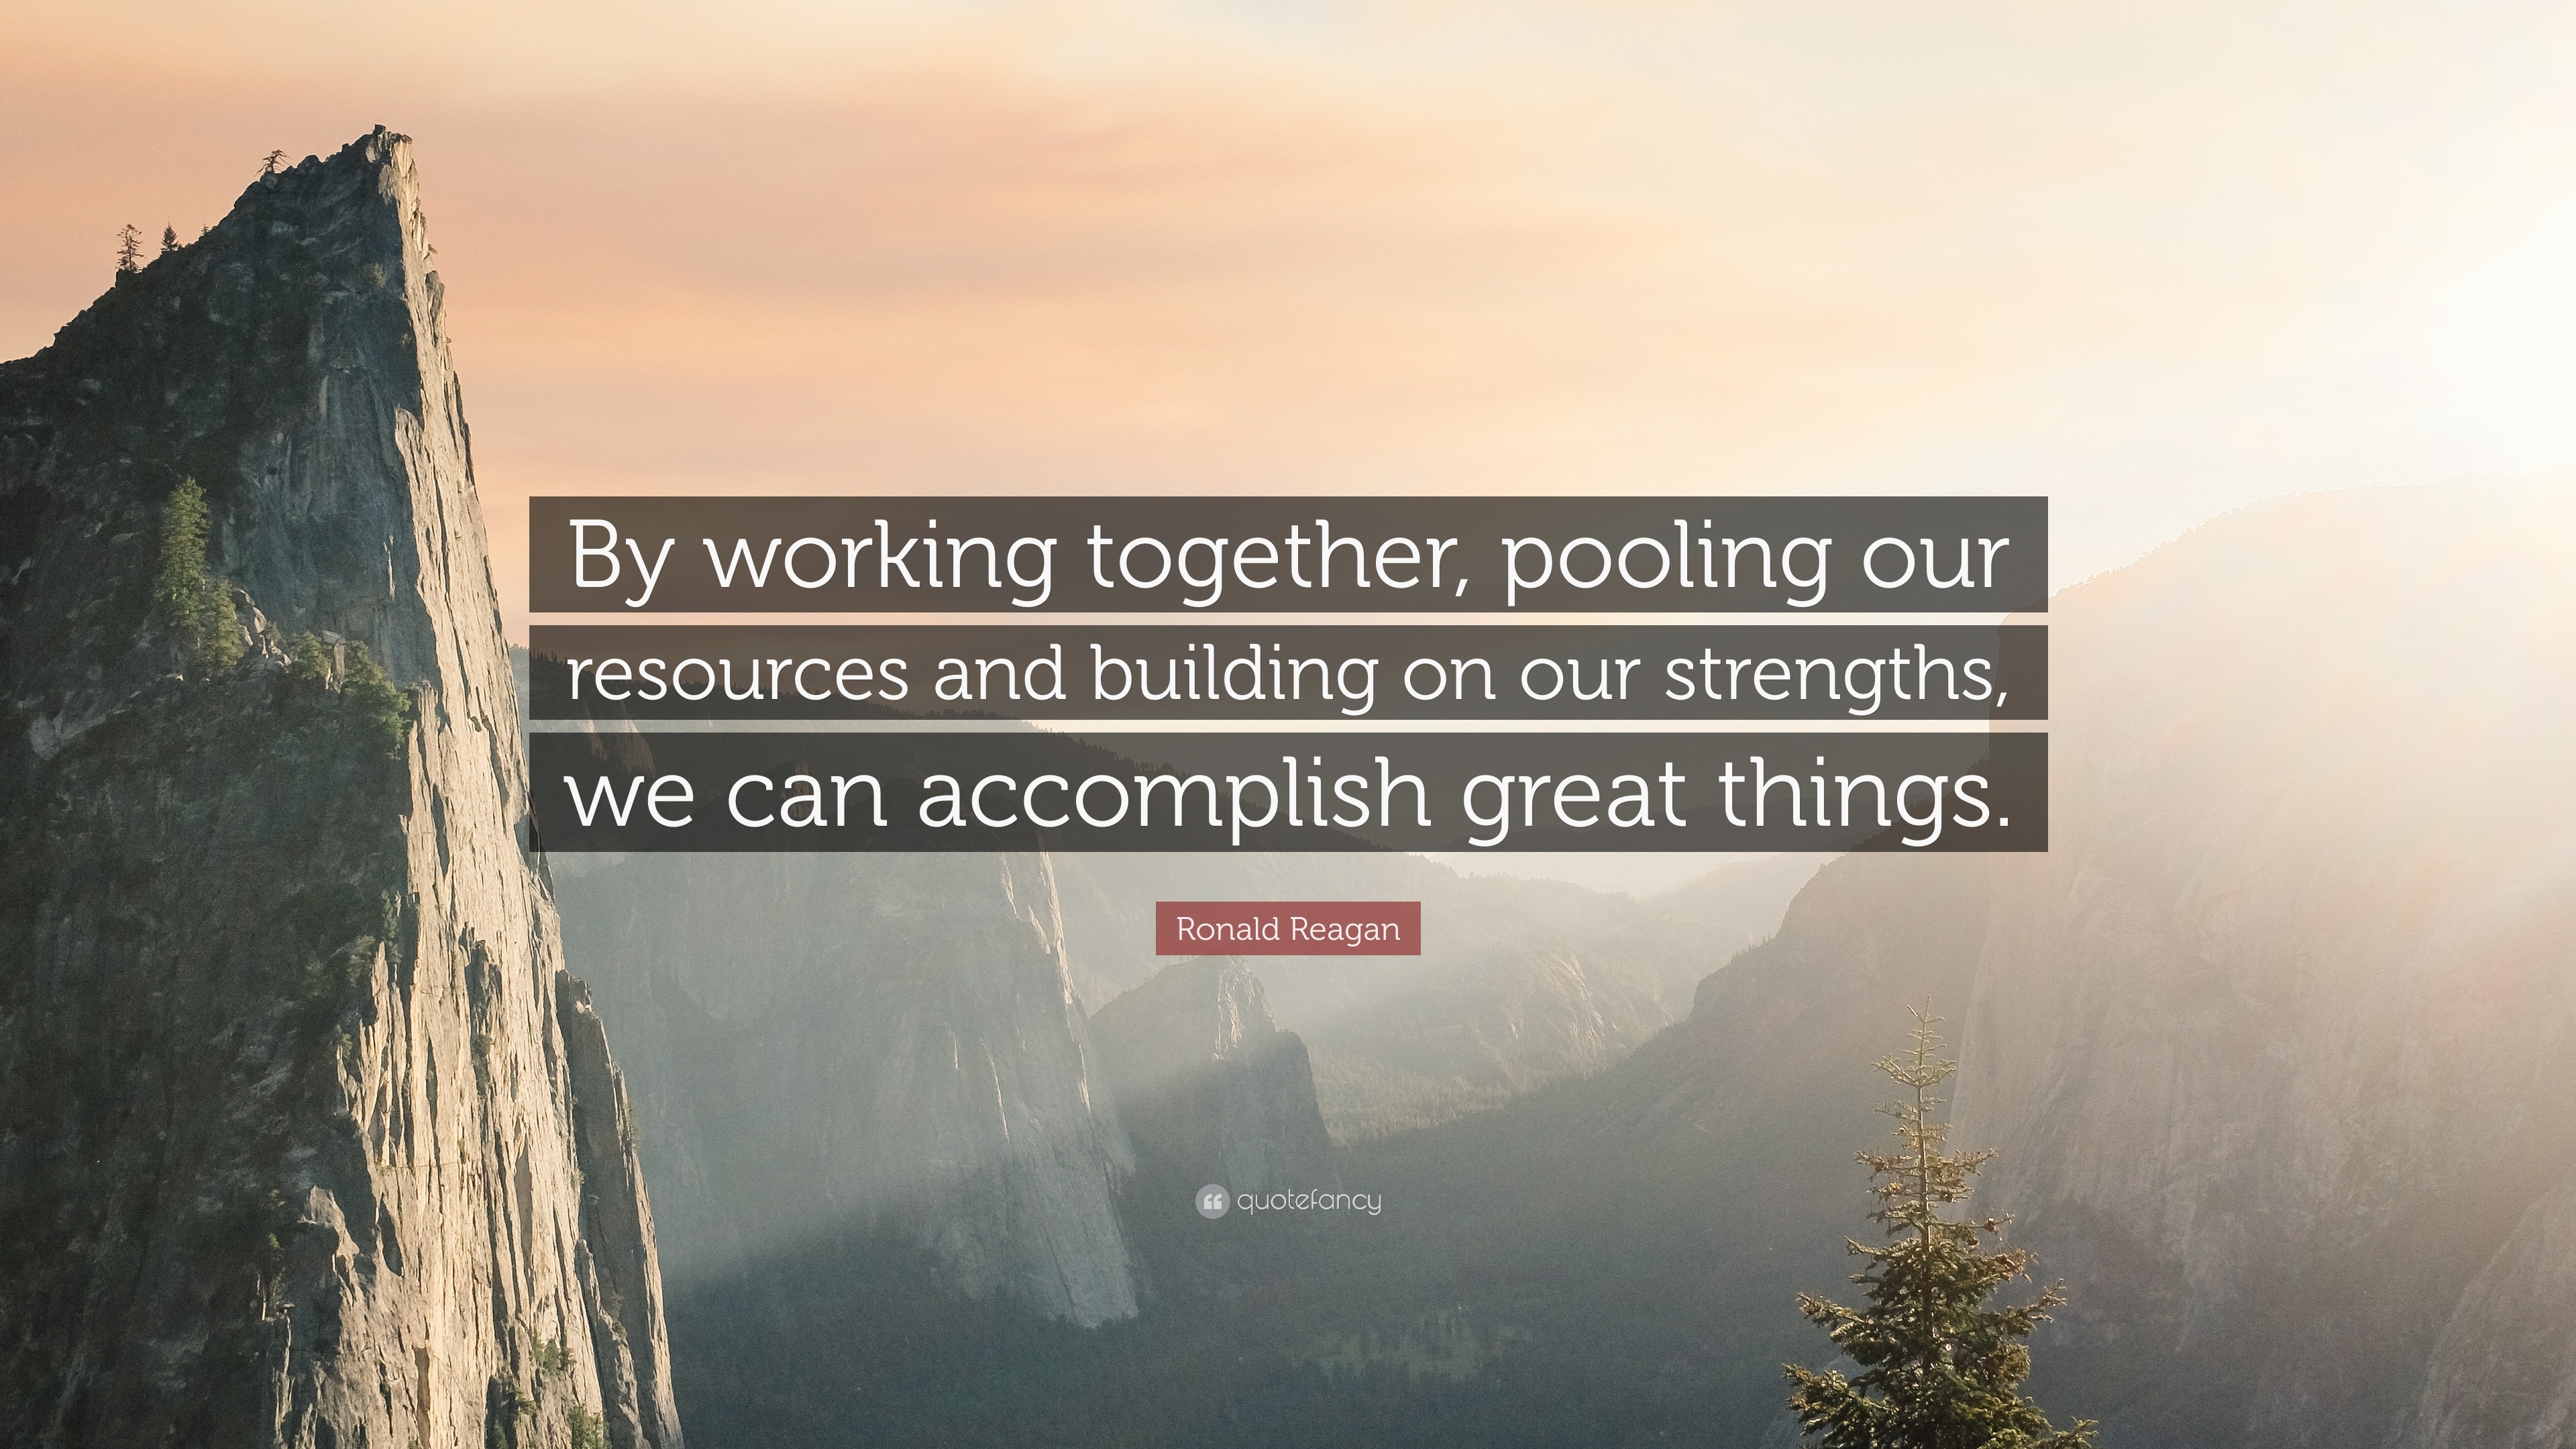 Best Teamwork Quotes: 35 Motivational Quotes for Teams